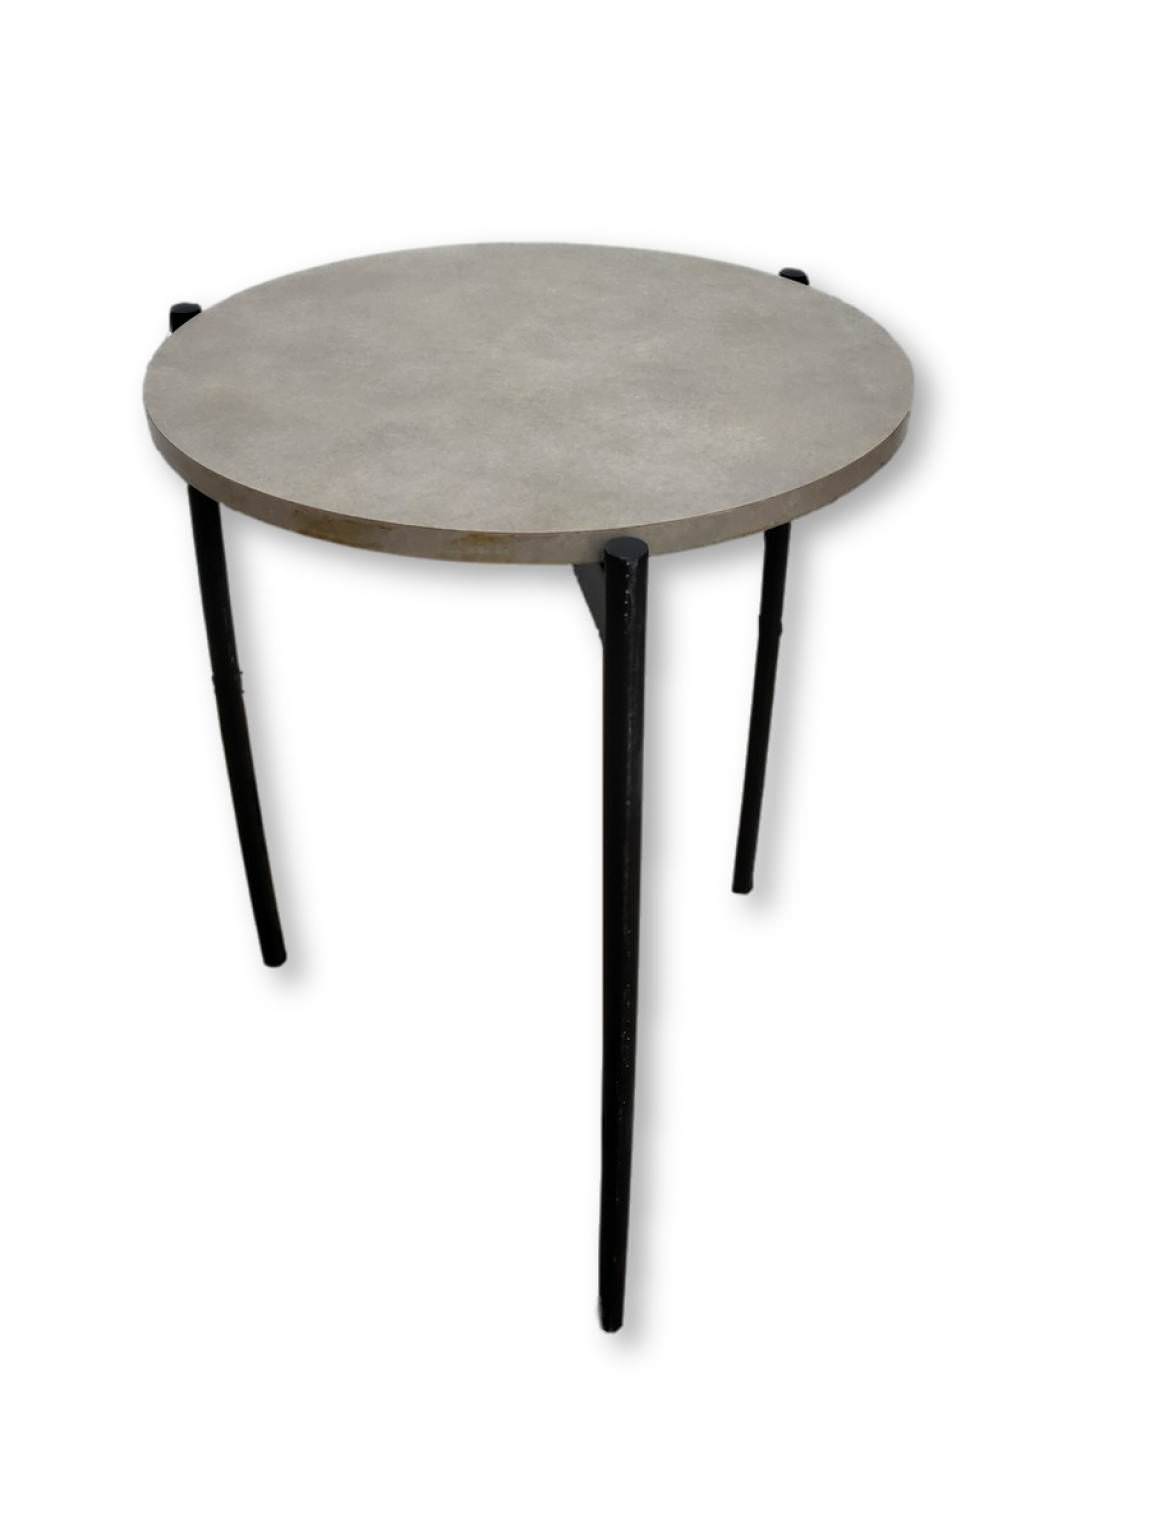 17” Round Table with Gray Top